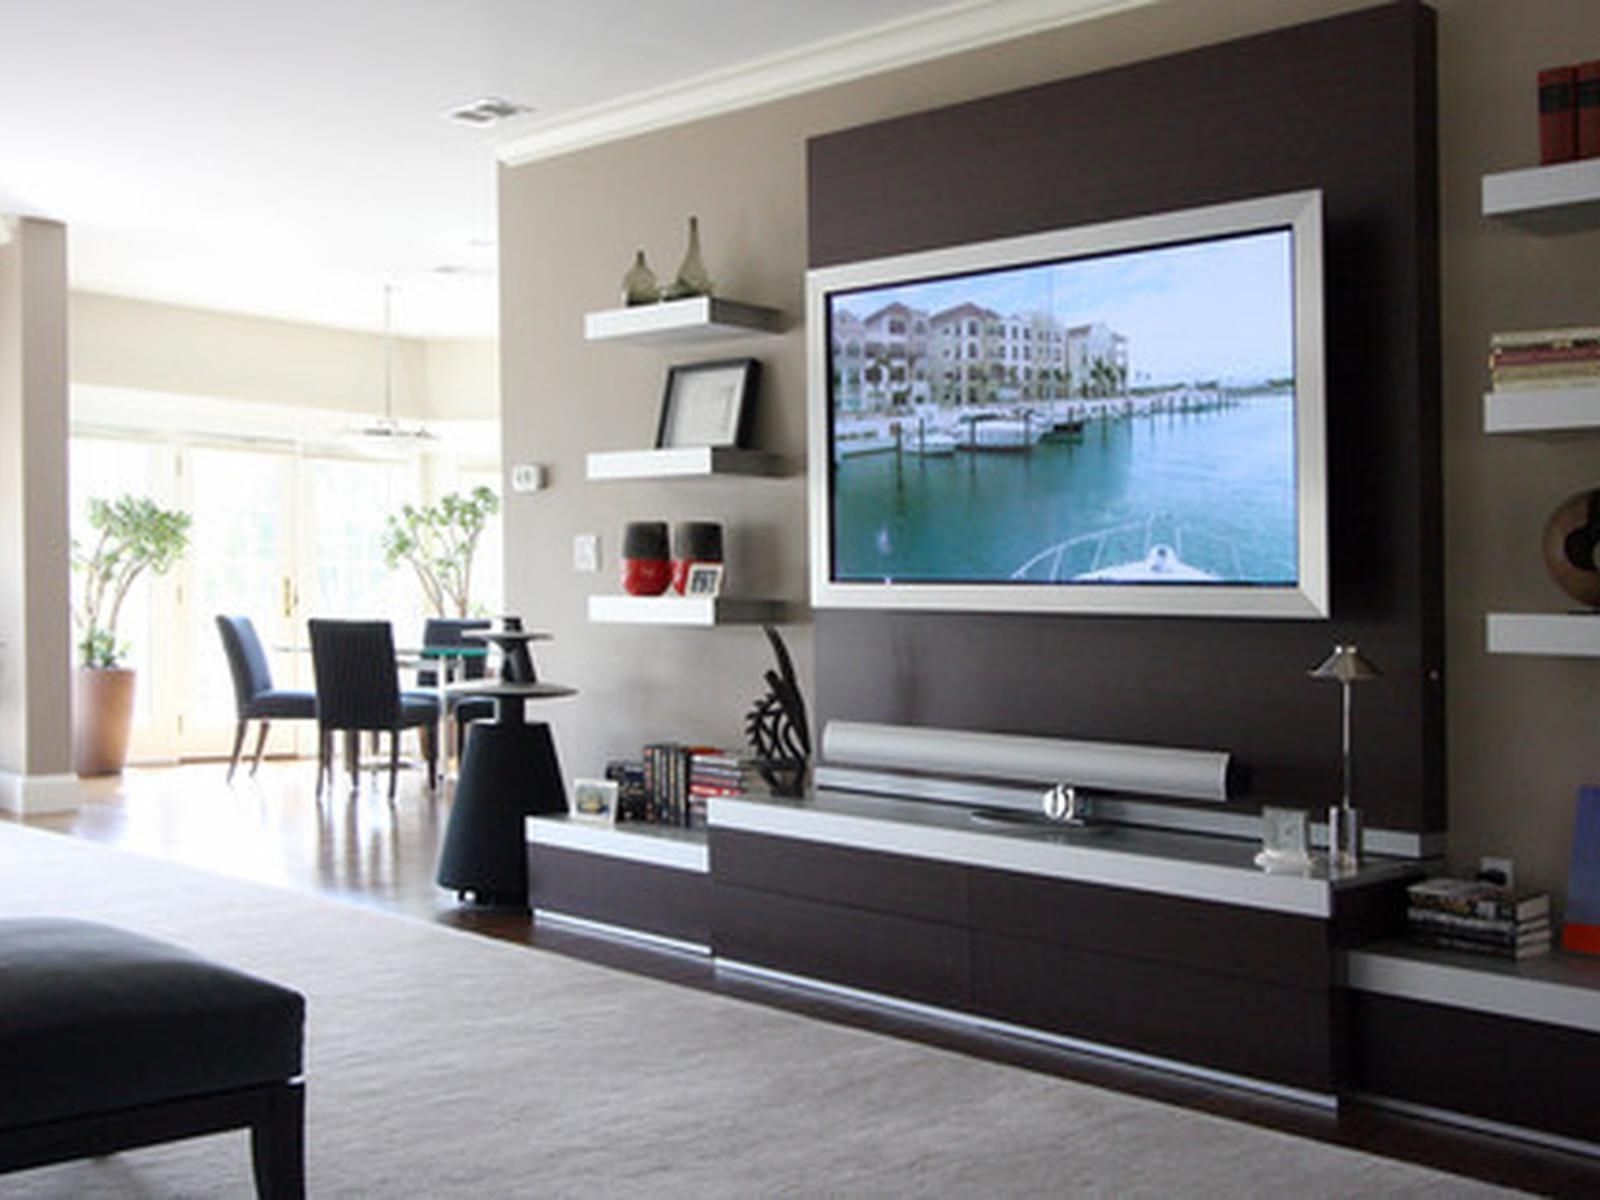 Decorating Living Room With Flat Screen Tv